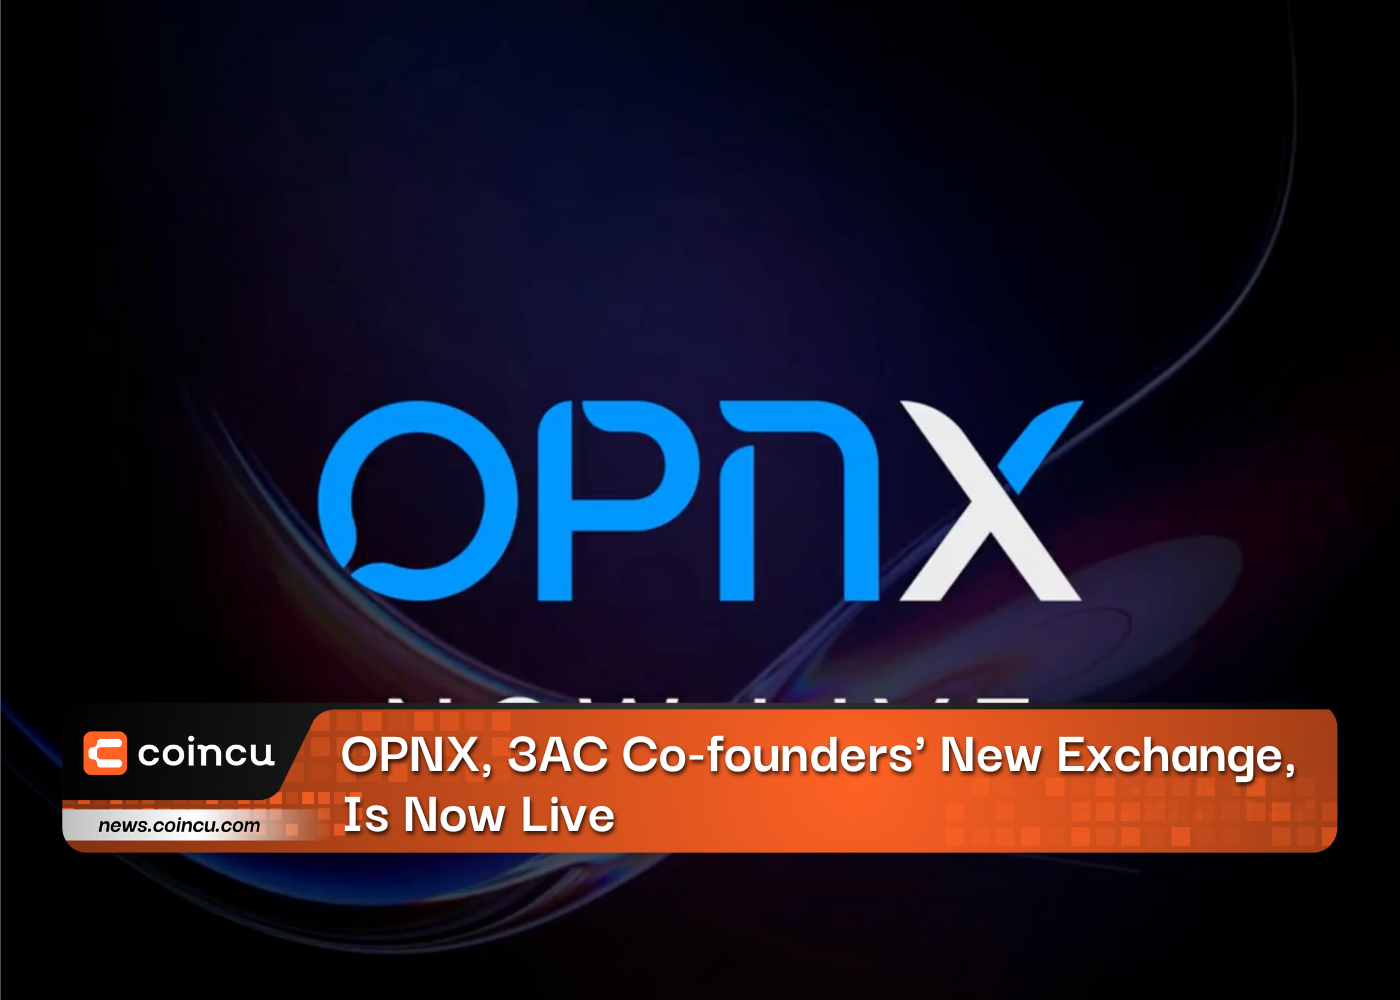 OPNX, 3AC Co-founders' New Exchange, Is Now Live